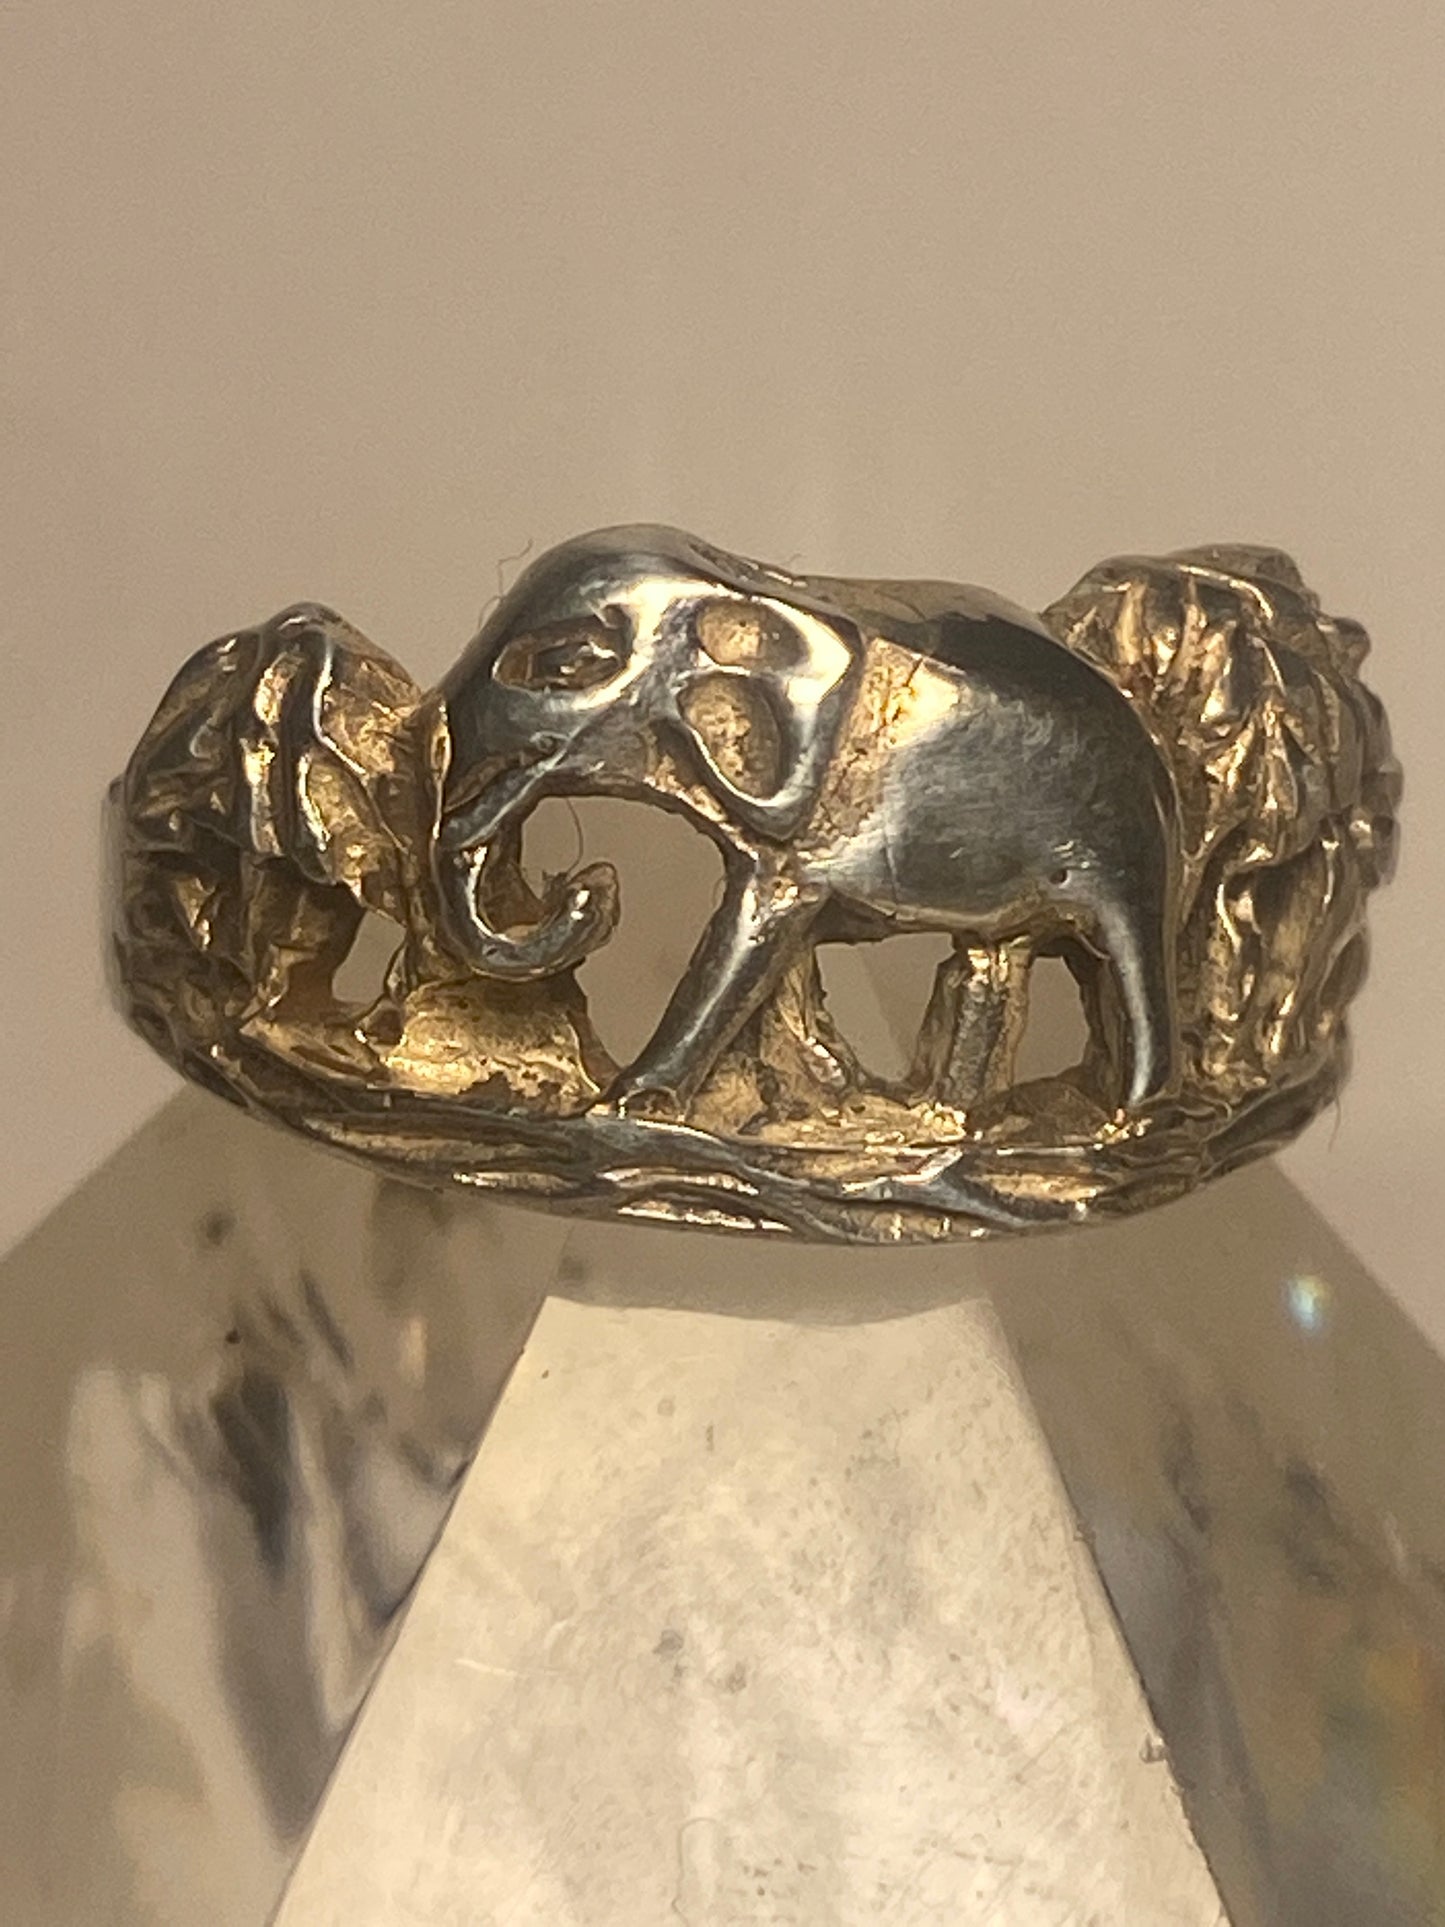 Elephant ring palm trees band sterling silver women